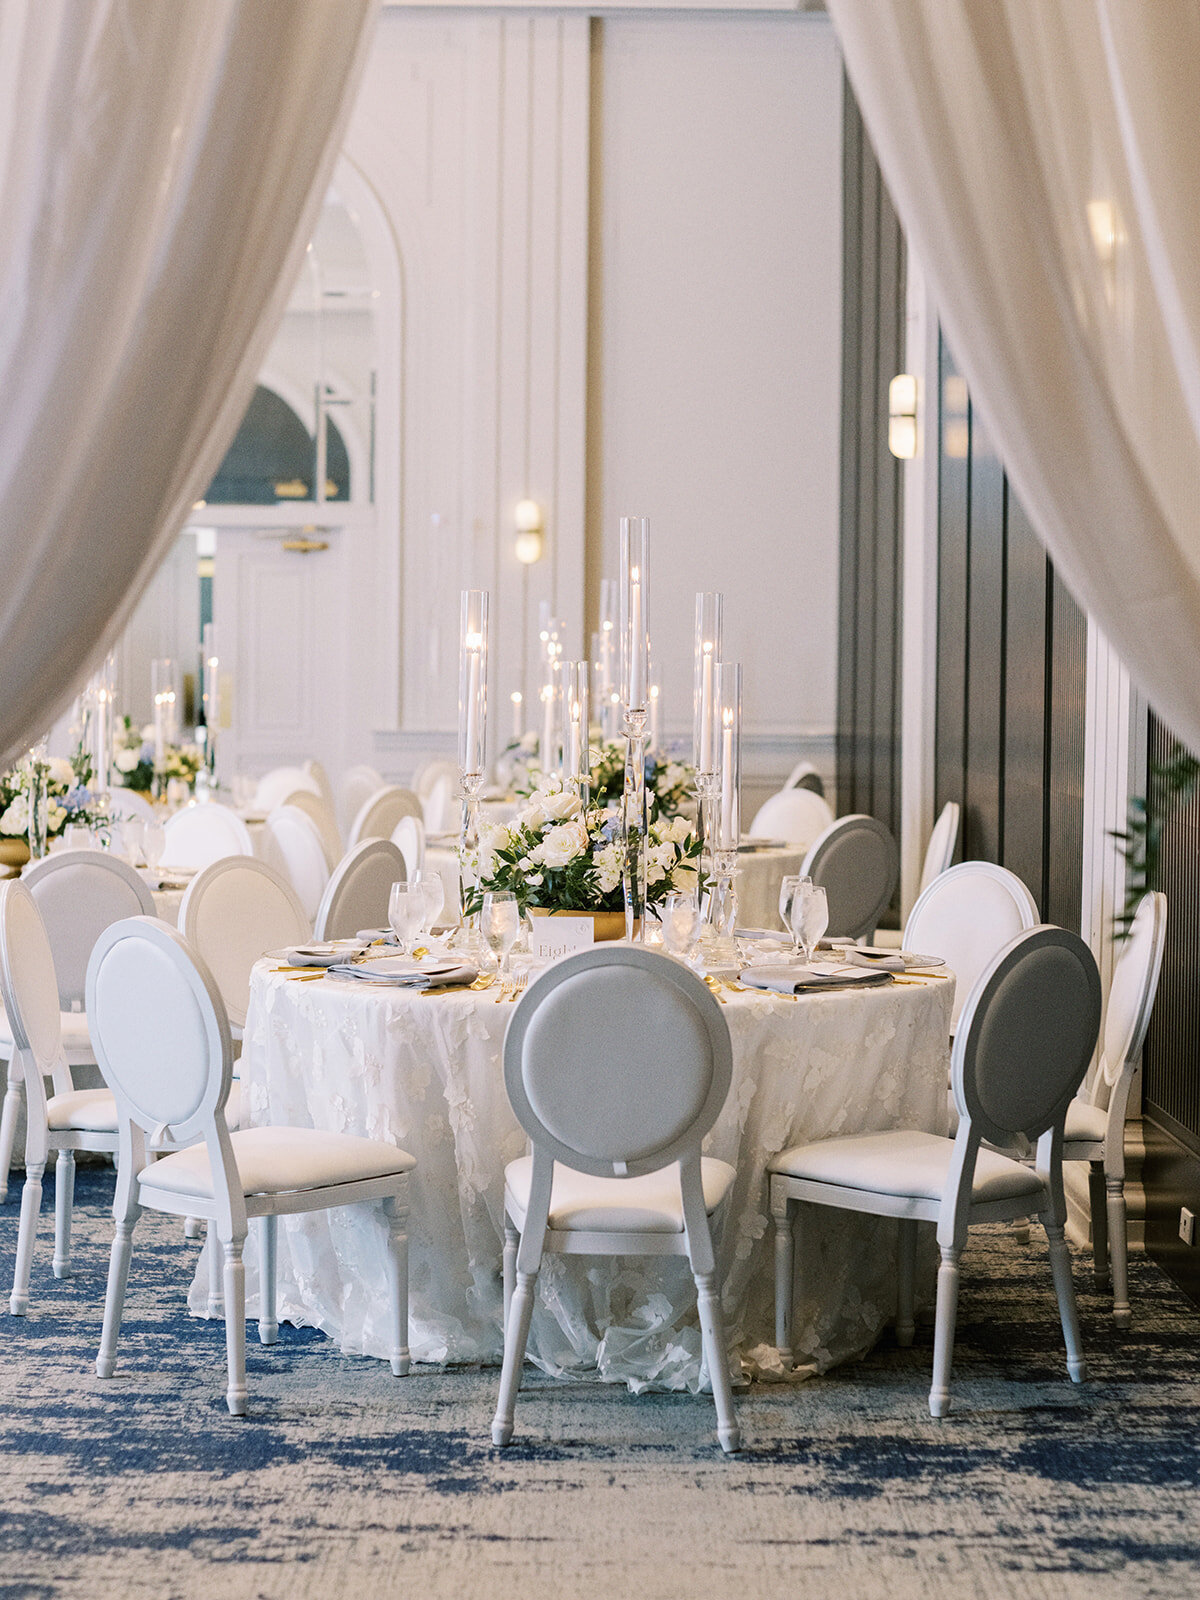 Elegant dining table setup with white chairs, floral centerpiece, and tall candleholders, framed by draped curtains in a sophisticated room with blue and white decor—perfect for a Banff Alberta wedding or any destination wedding in Canada.